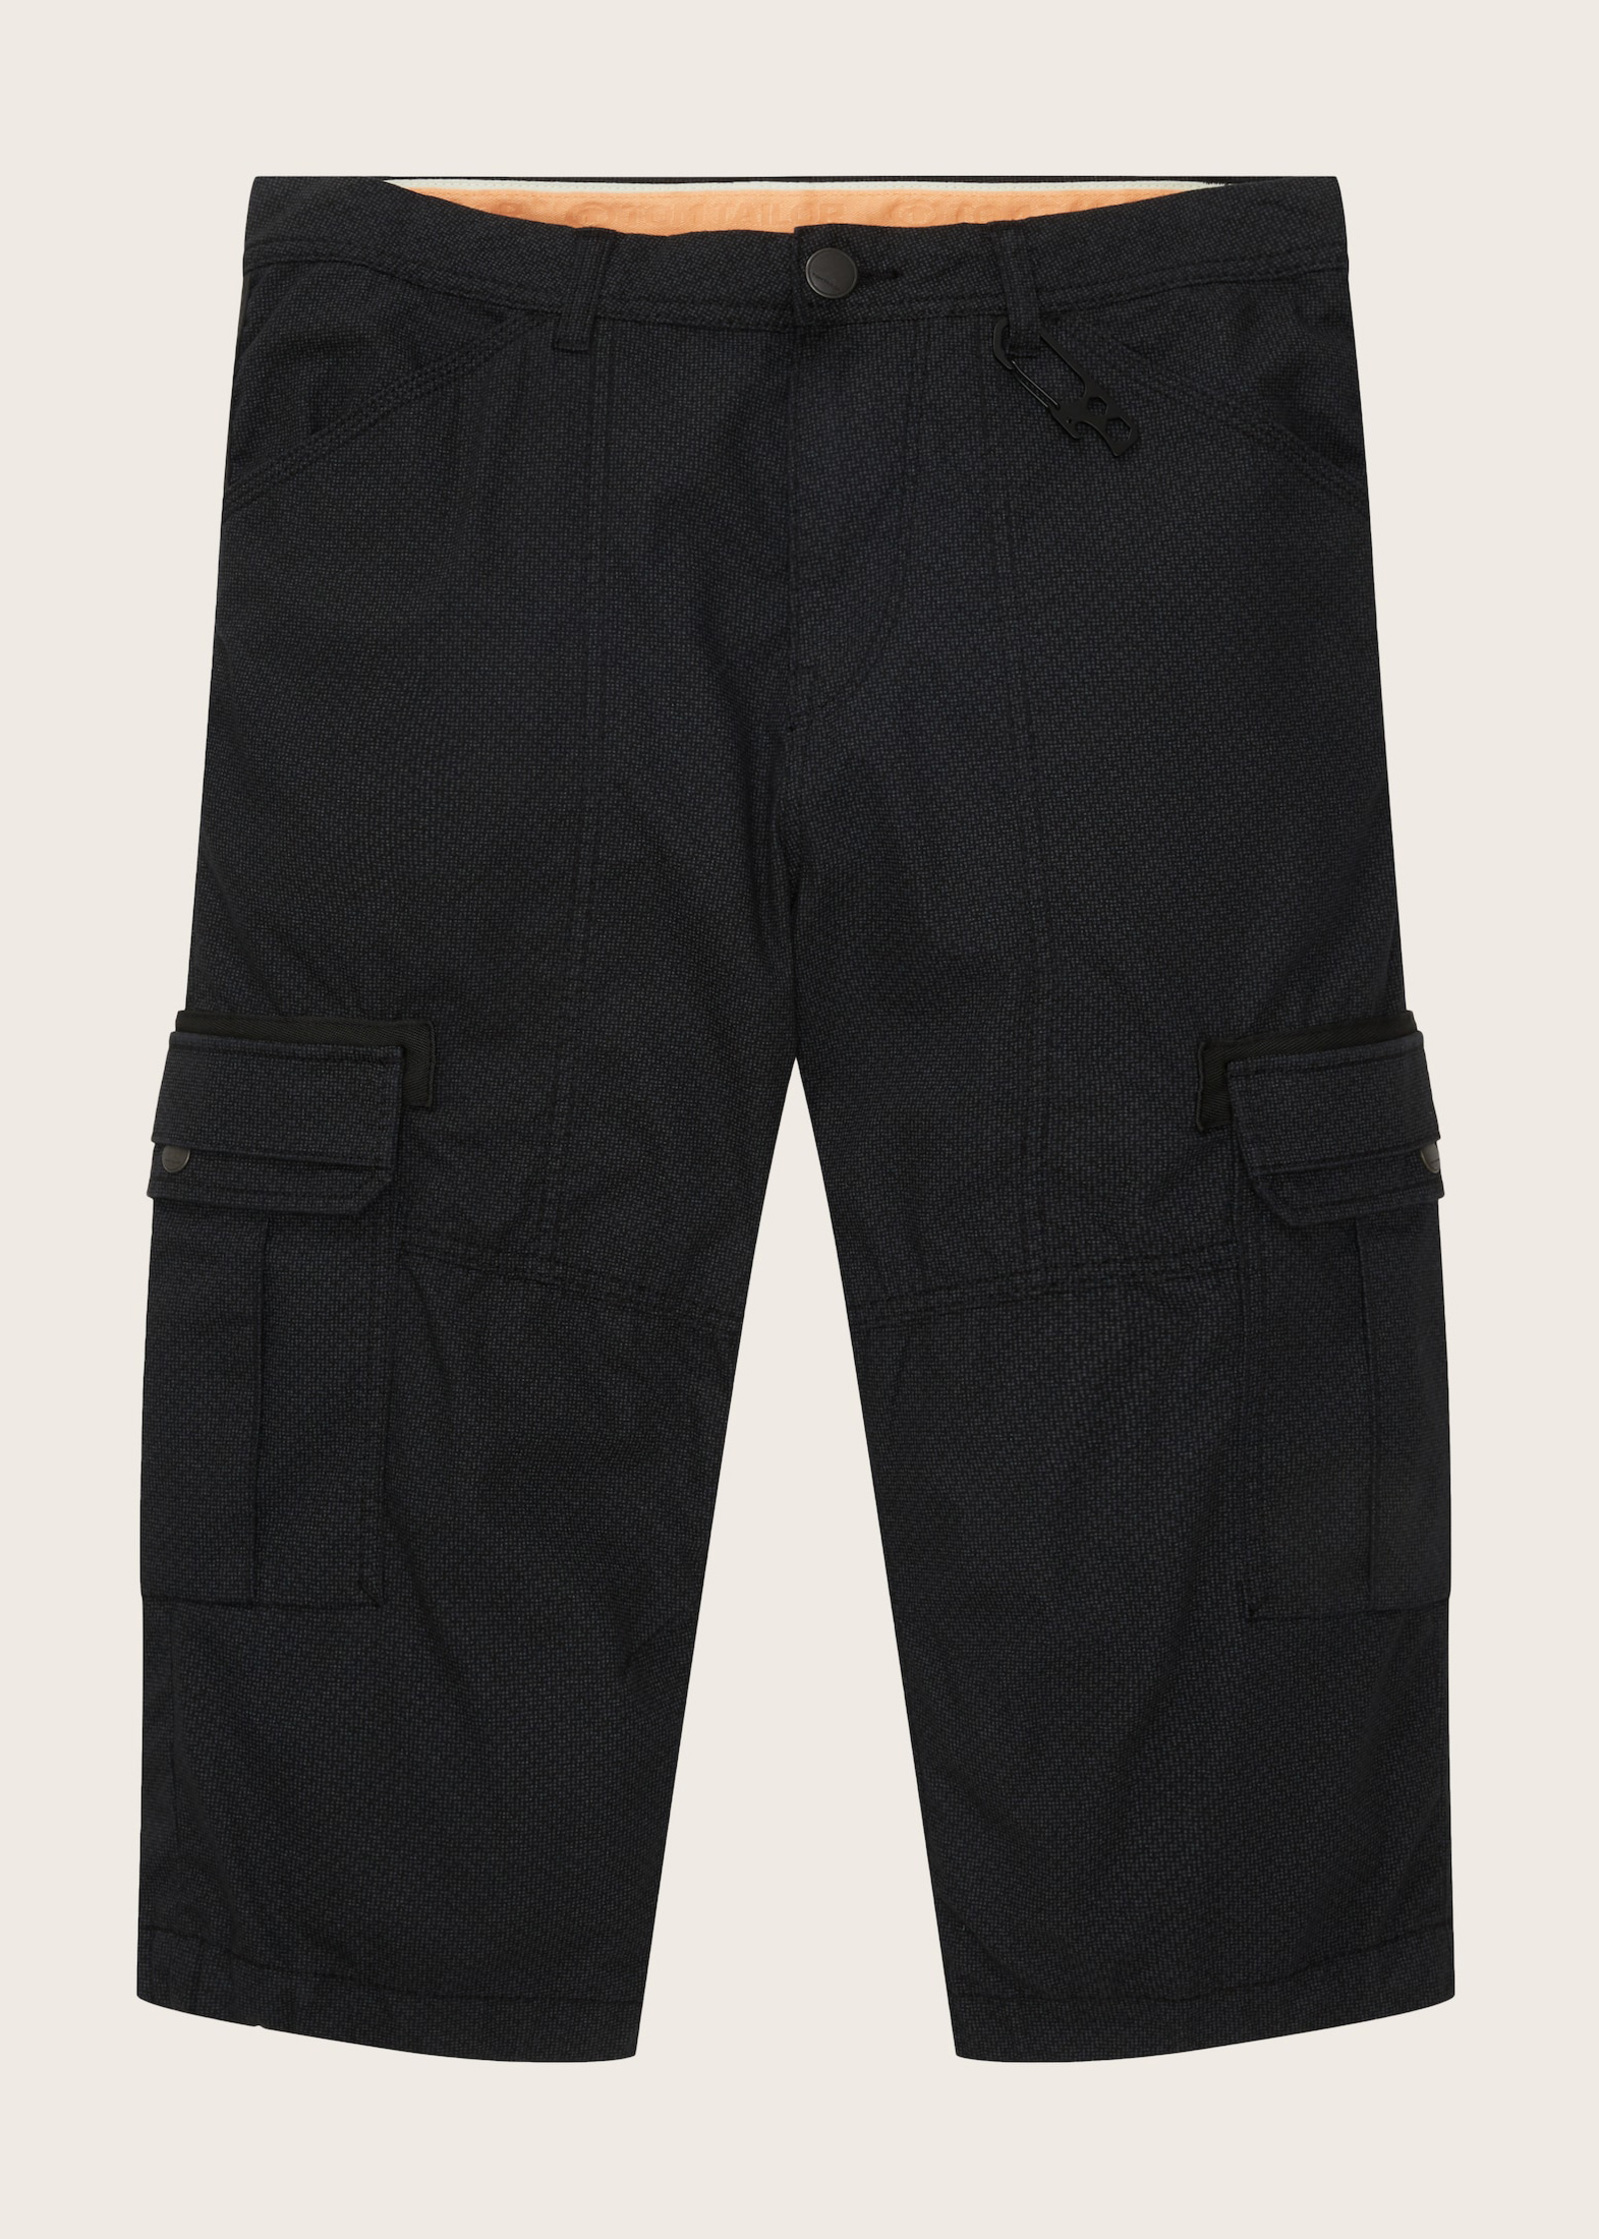 Tom Tailor® Shorts Size Navy 32 Check Cargo 